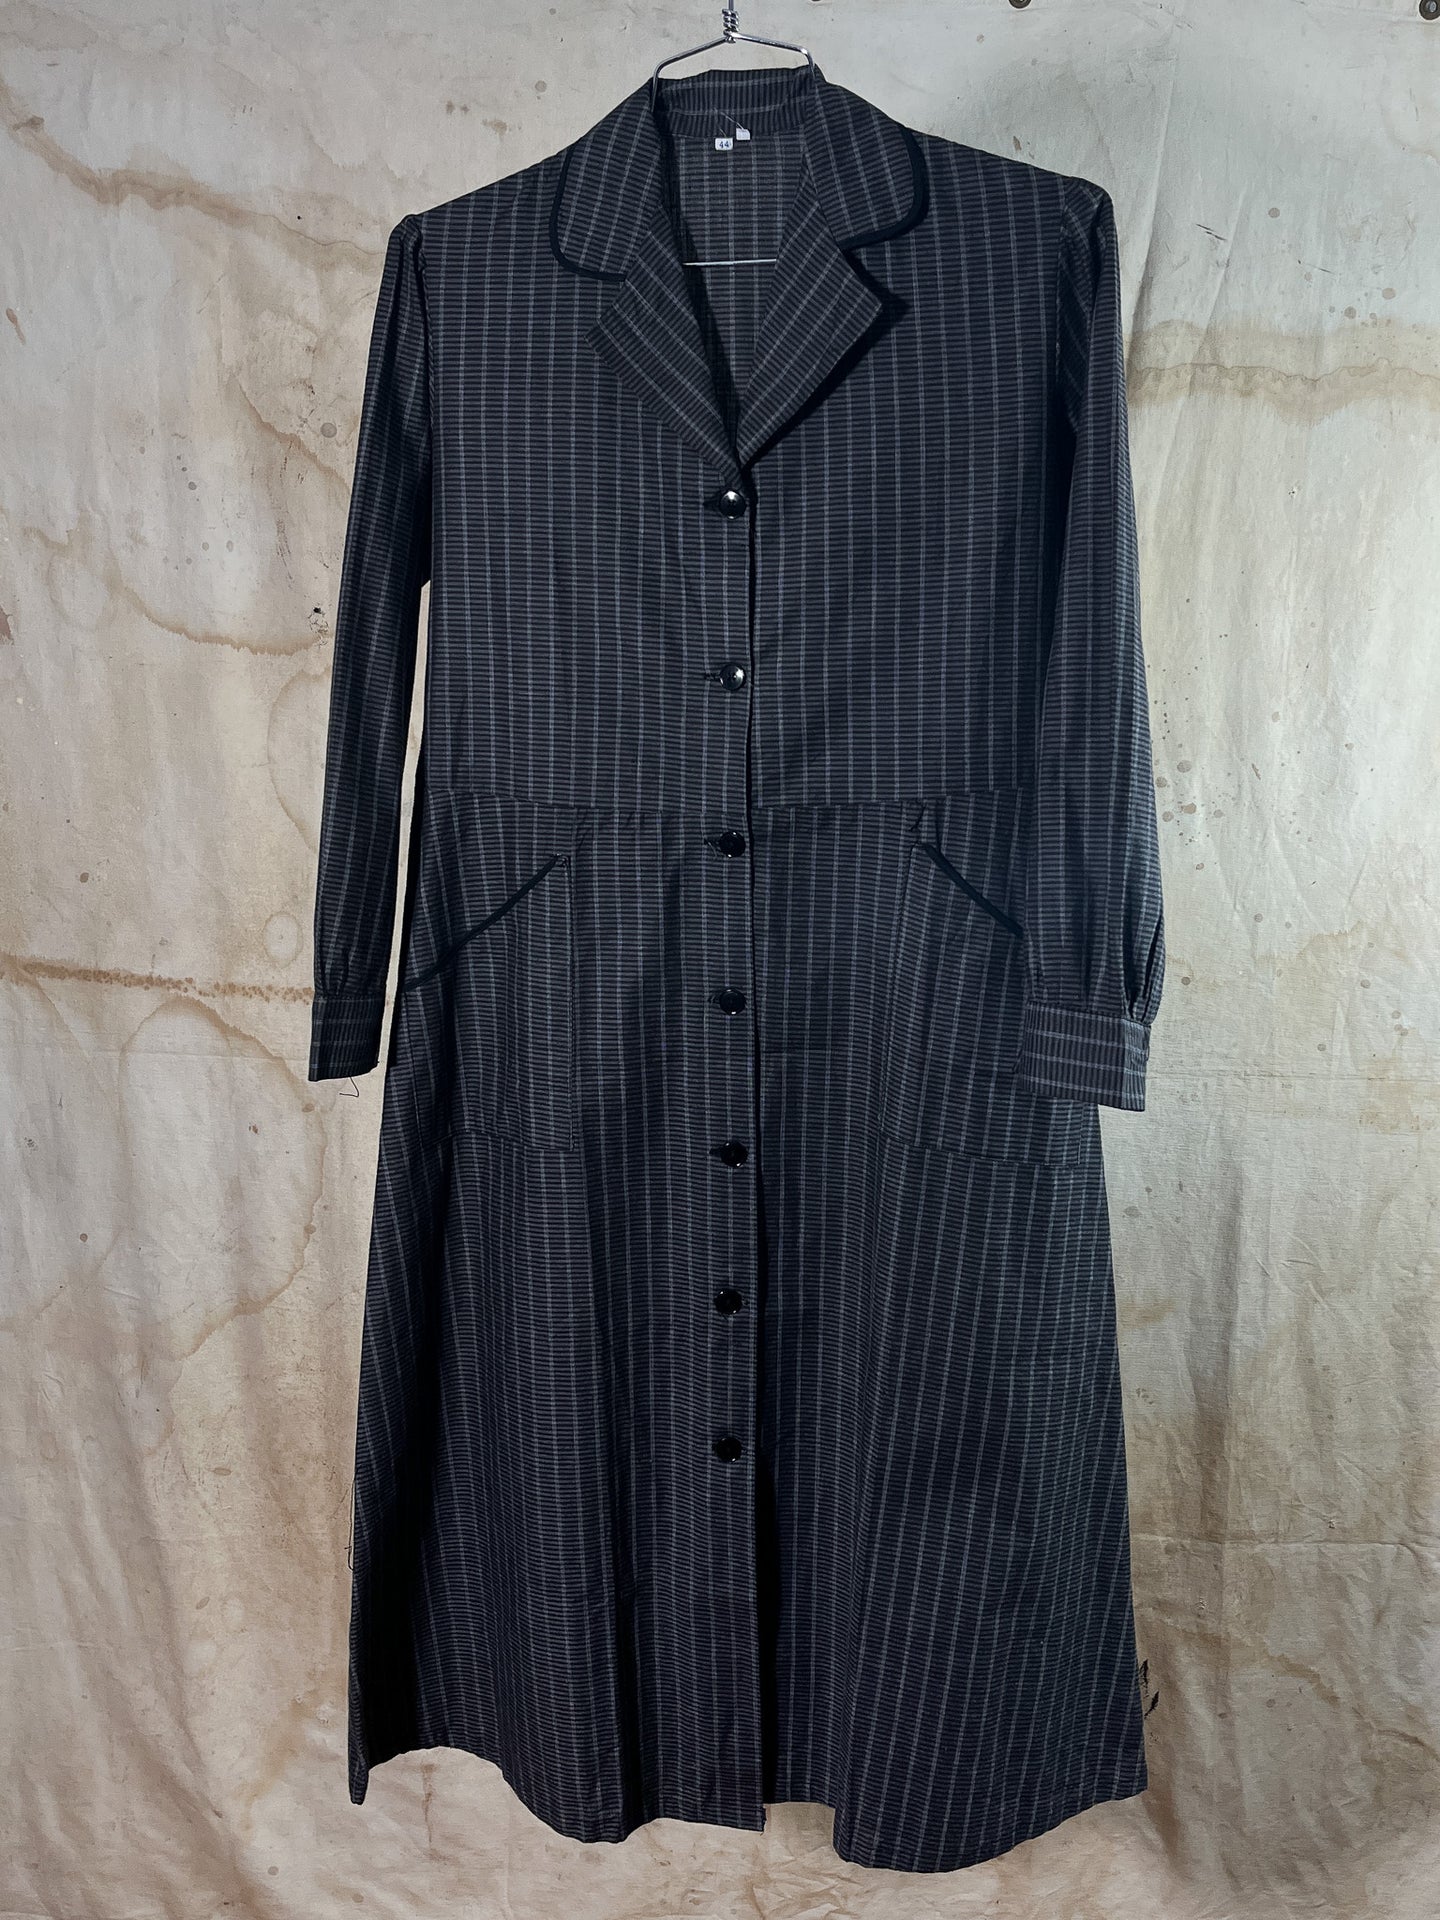 French Gray Plaid Belted Work Dress/ Duster c. 1940s